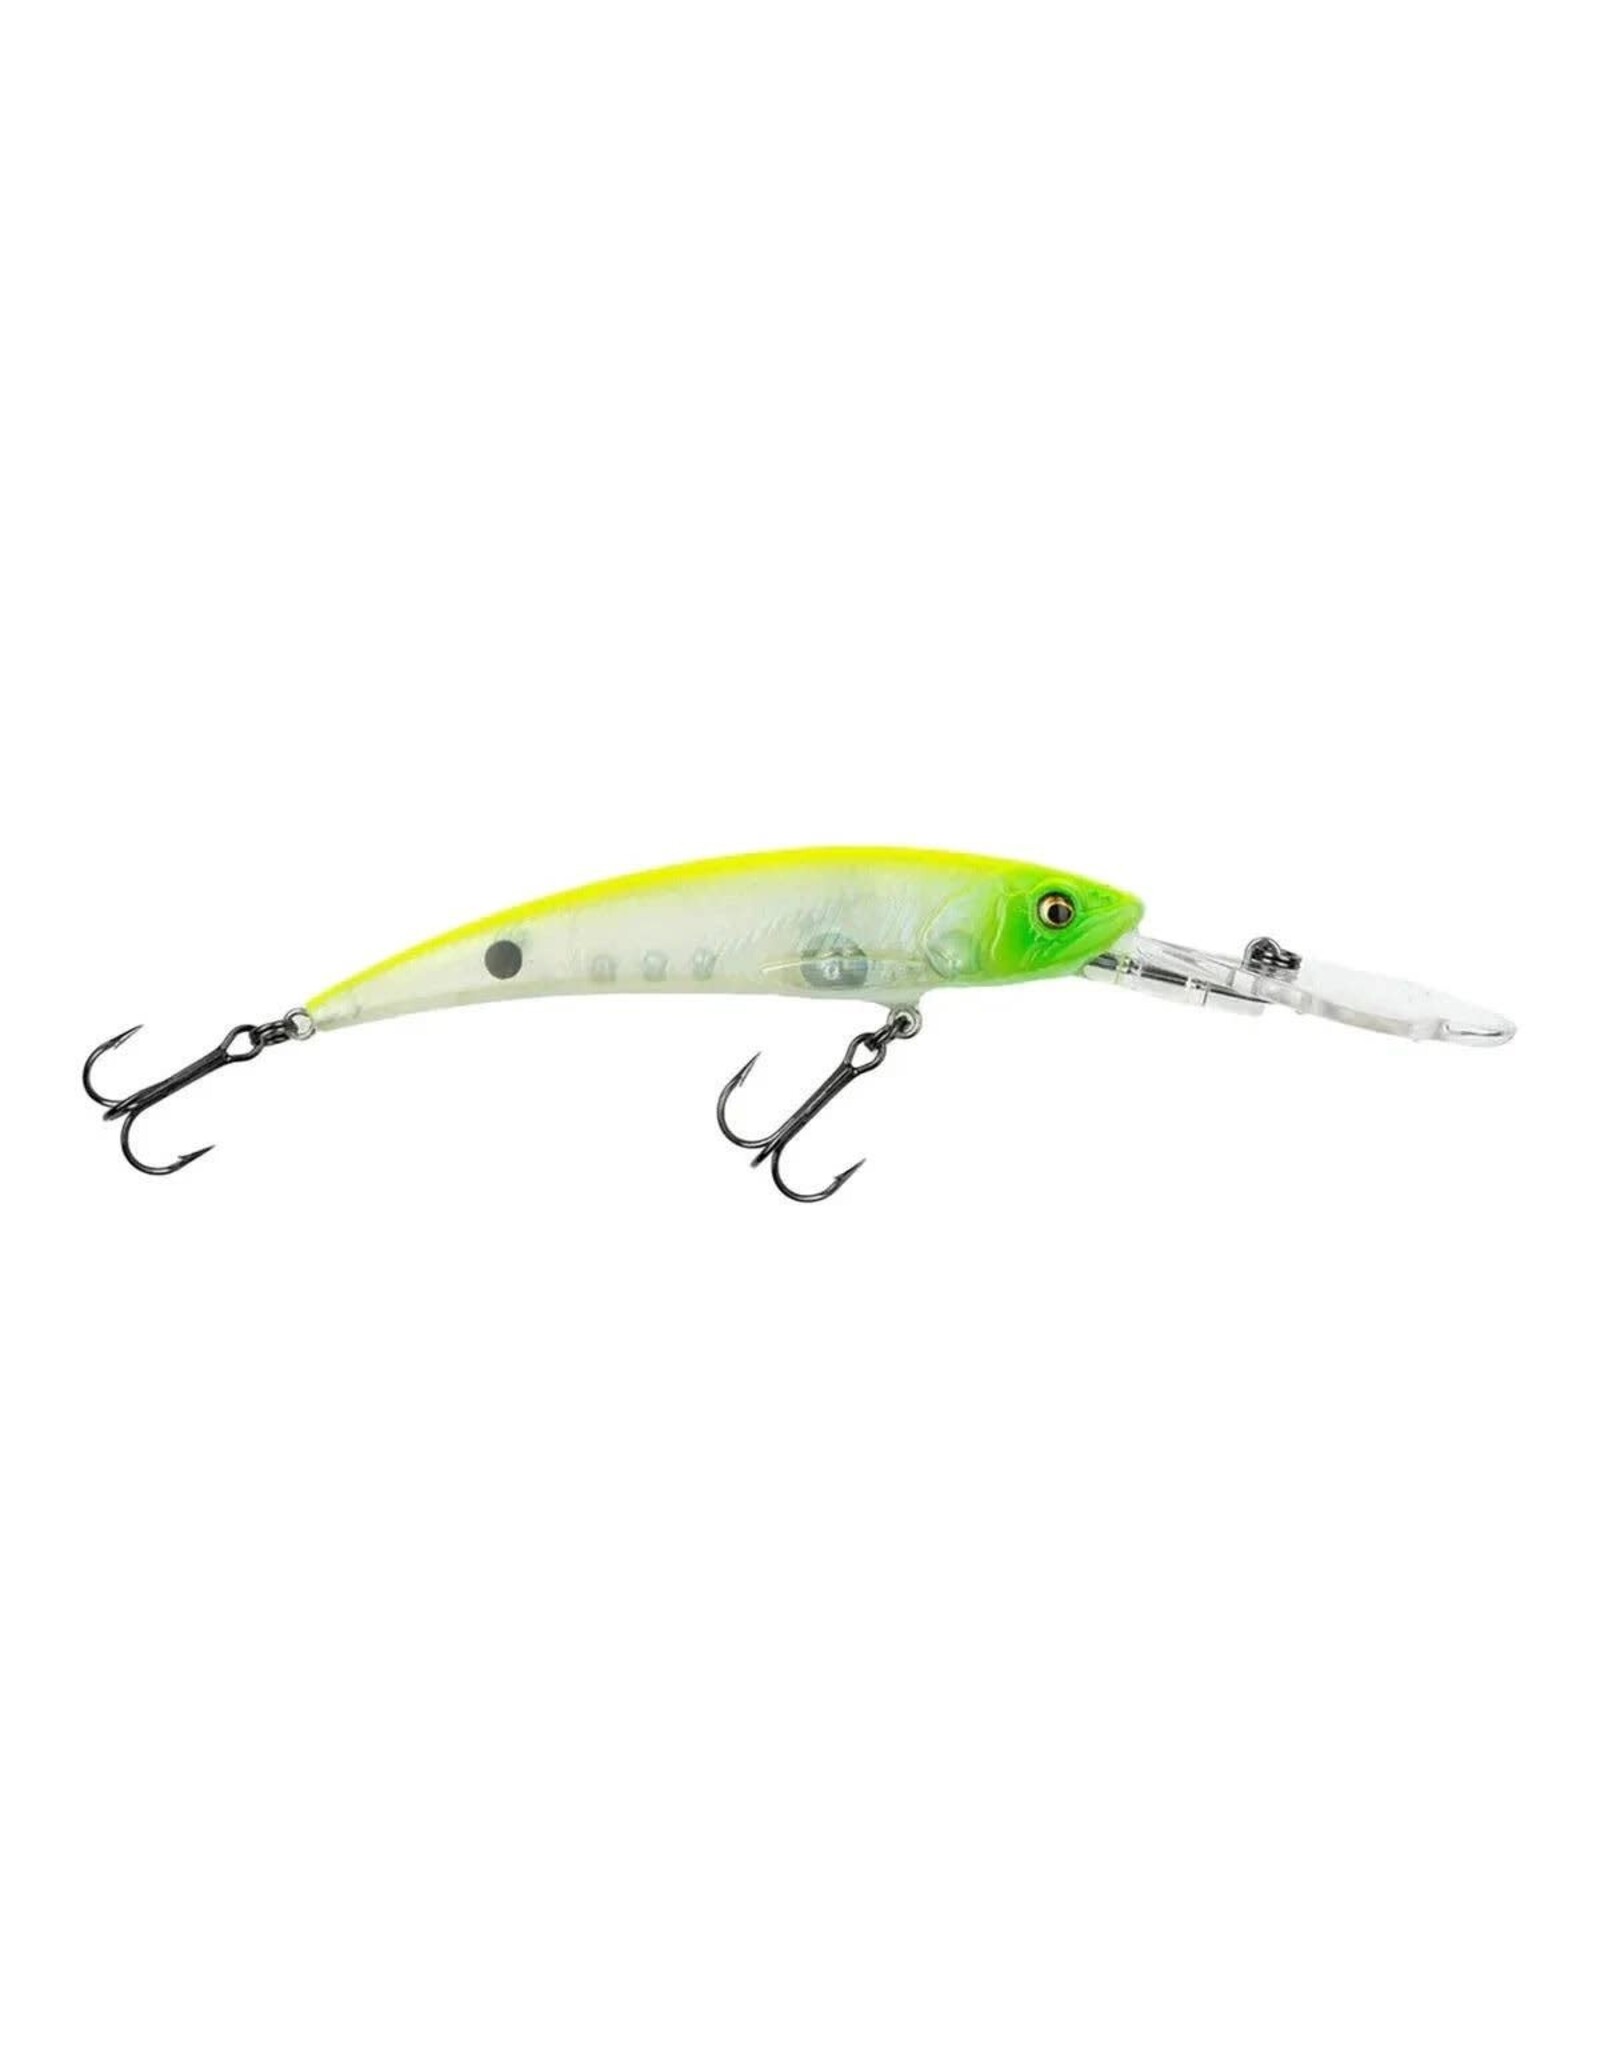 Freedom Lures Freedom Tackle Ultra Diver Minnow 75 Crankbait 3" 3/8oz